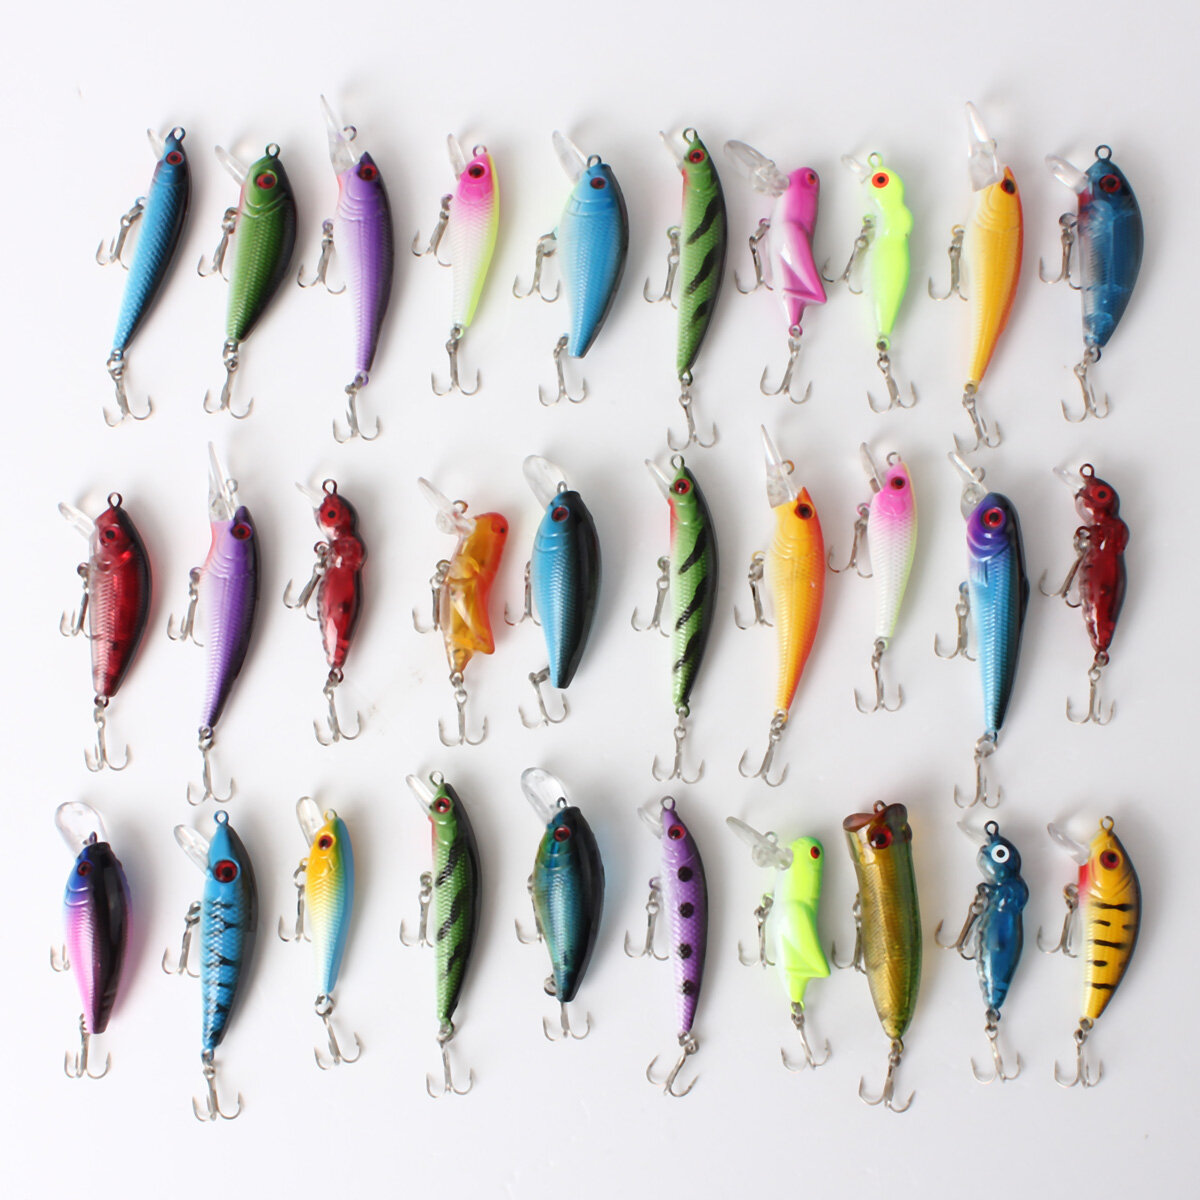 

30PCS Mixed Fishing Hard Baits Lures With Hooks Fishing Tackle Spinners Soft Bait For Pike Bass Trout Salmon Sea Fishing